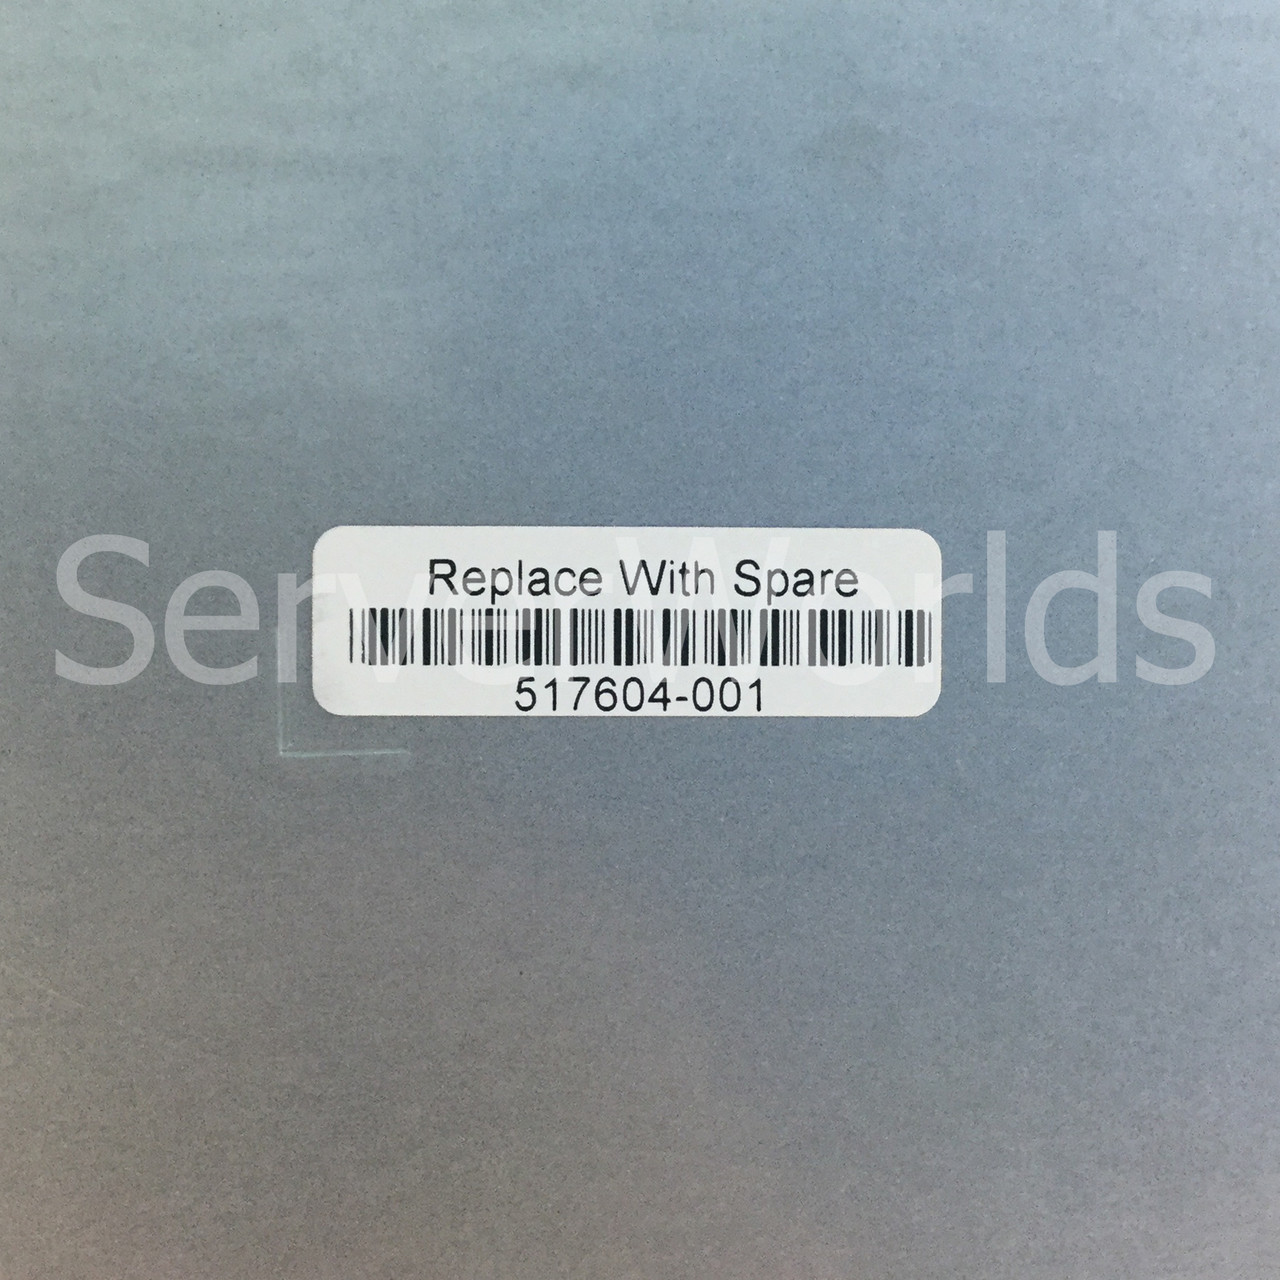 HPe 517604-001 DC04 Core Switching Blade